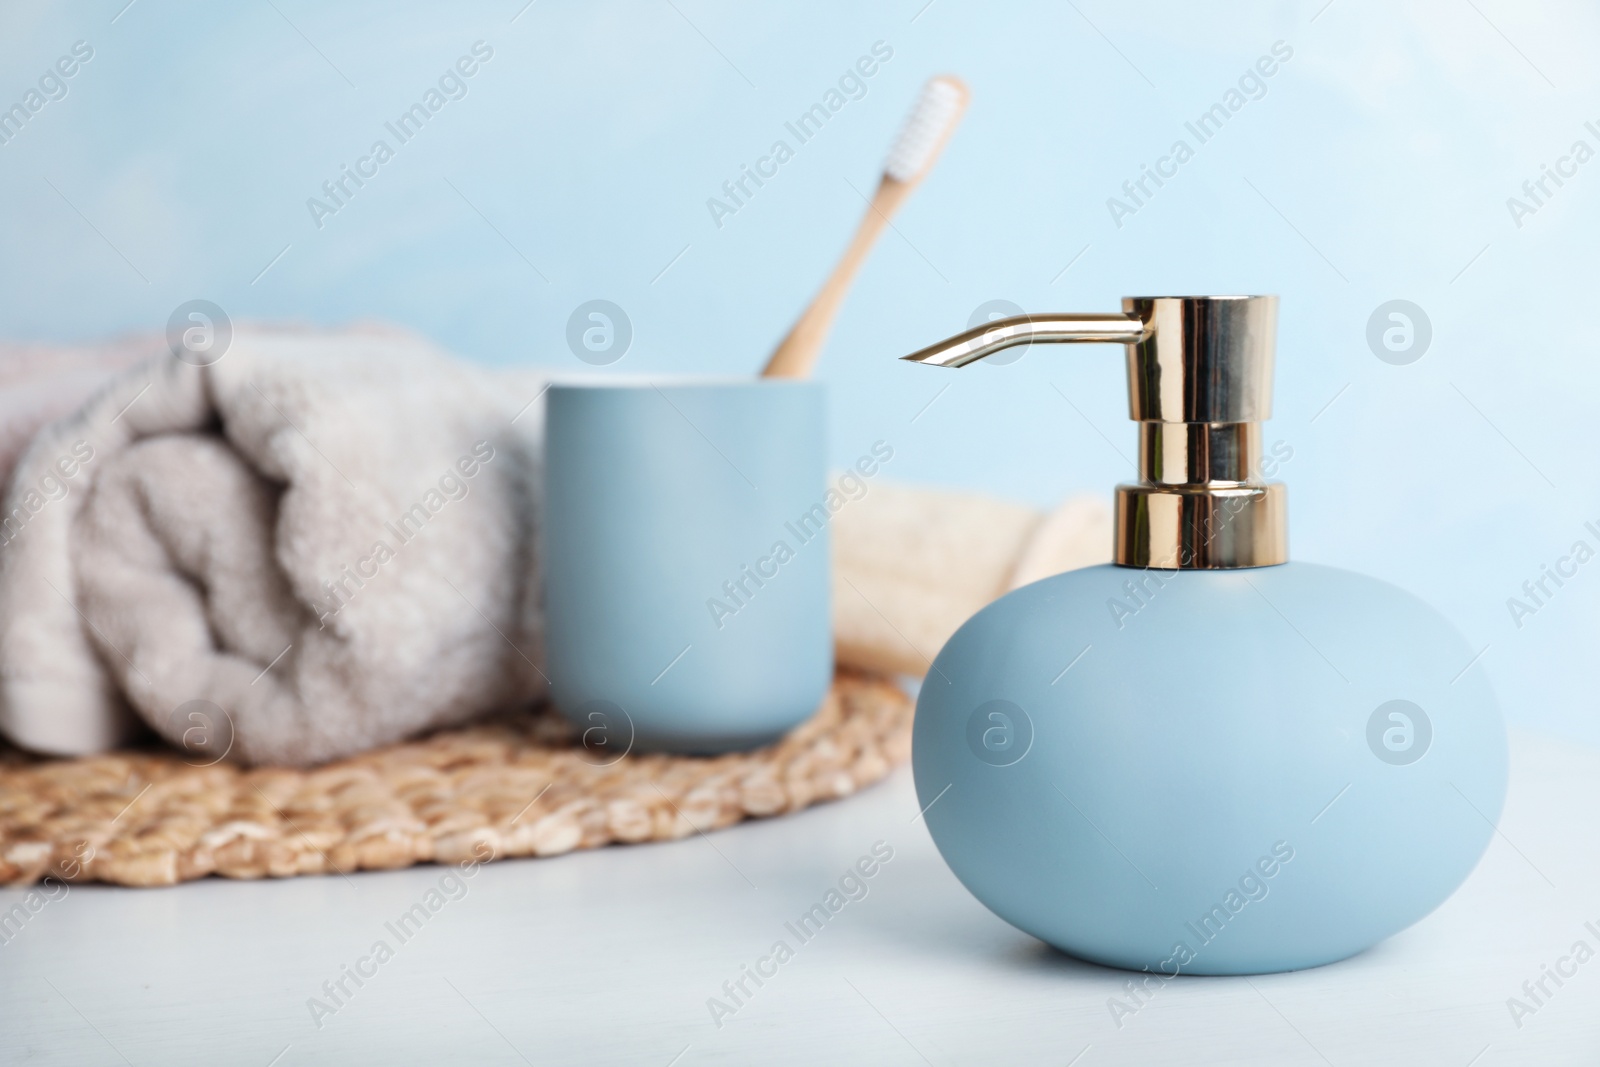 Photo of Stylish soap dispenser, holder with toothbrush and towel on table. Space for text